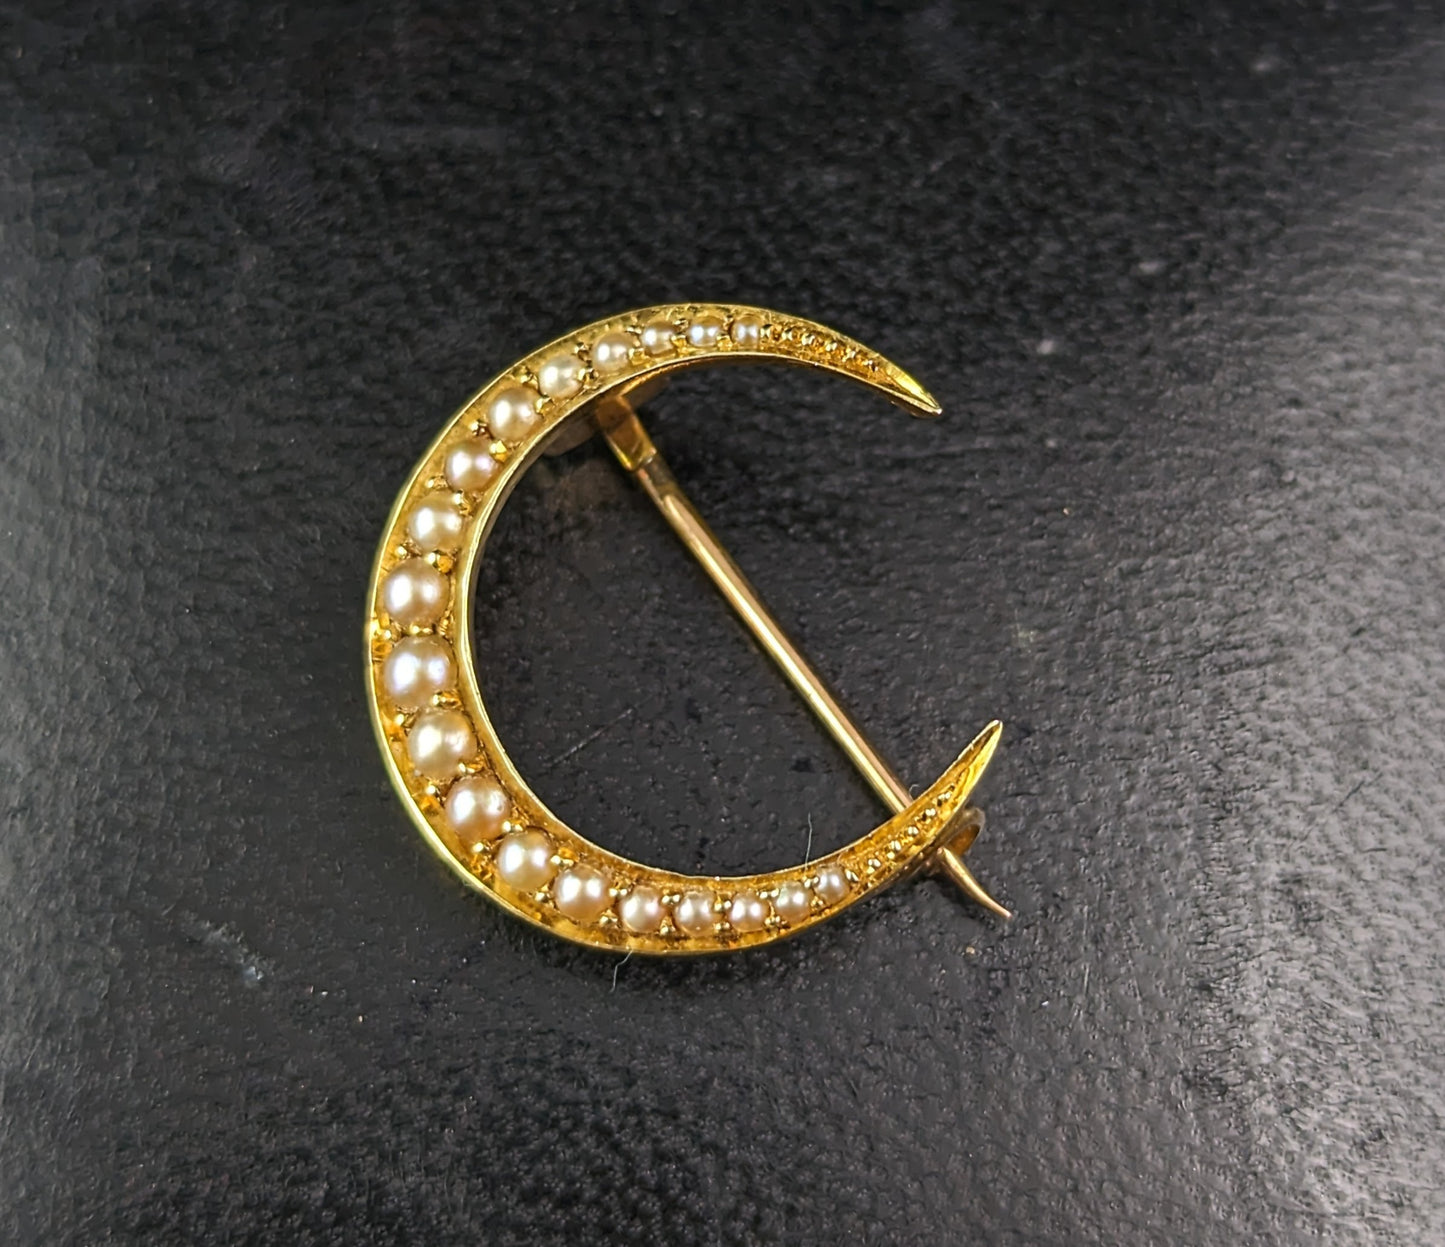 Antique 15ct gold Pearl Crescent moon brooch, Victorian